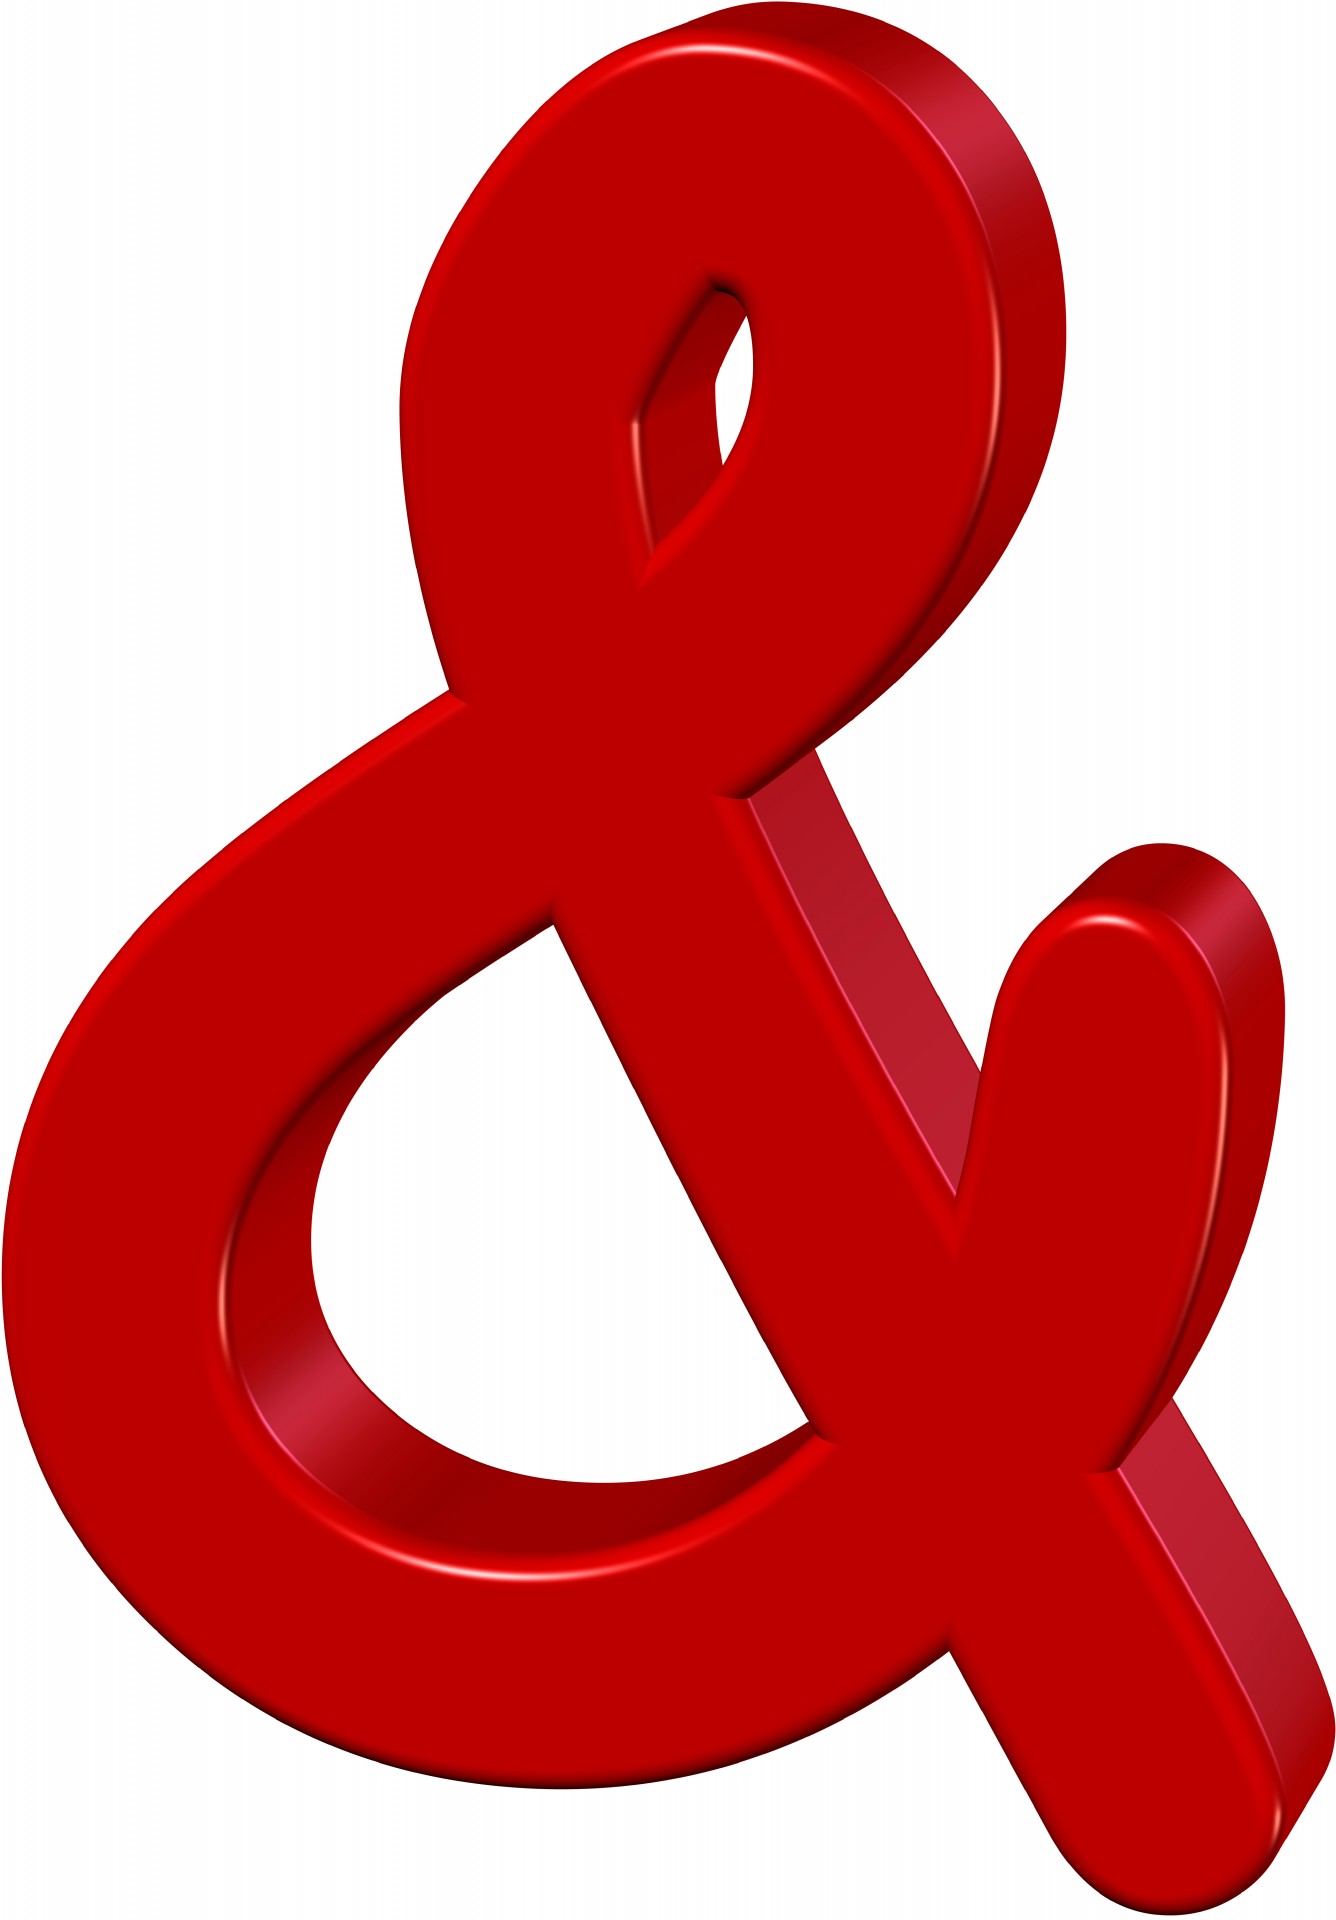 ampersand-font-sign-isolated-decoration-free-image-from-needpix